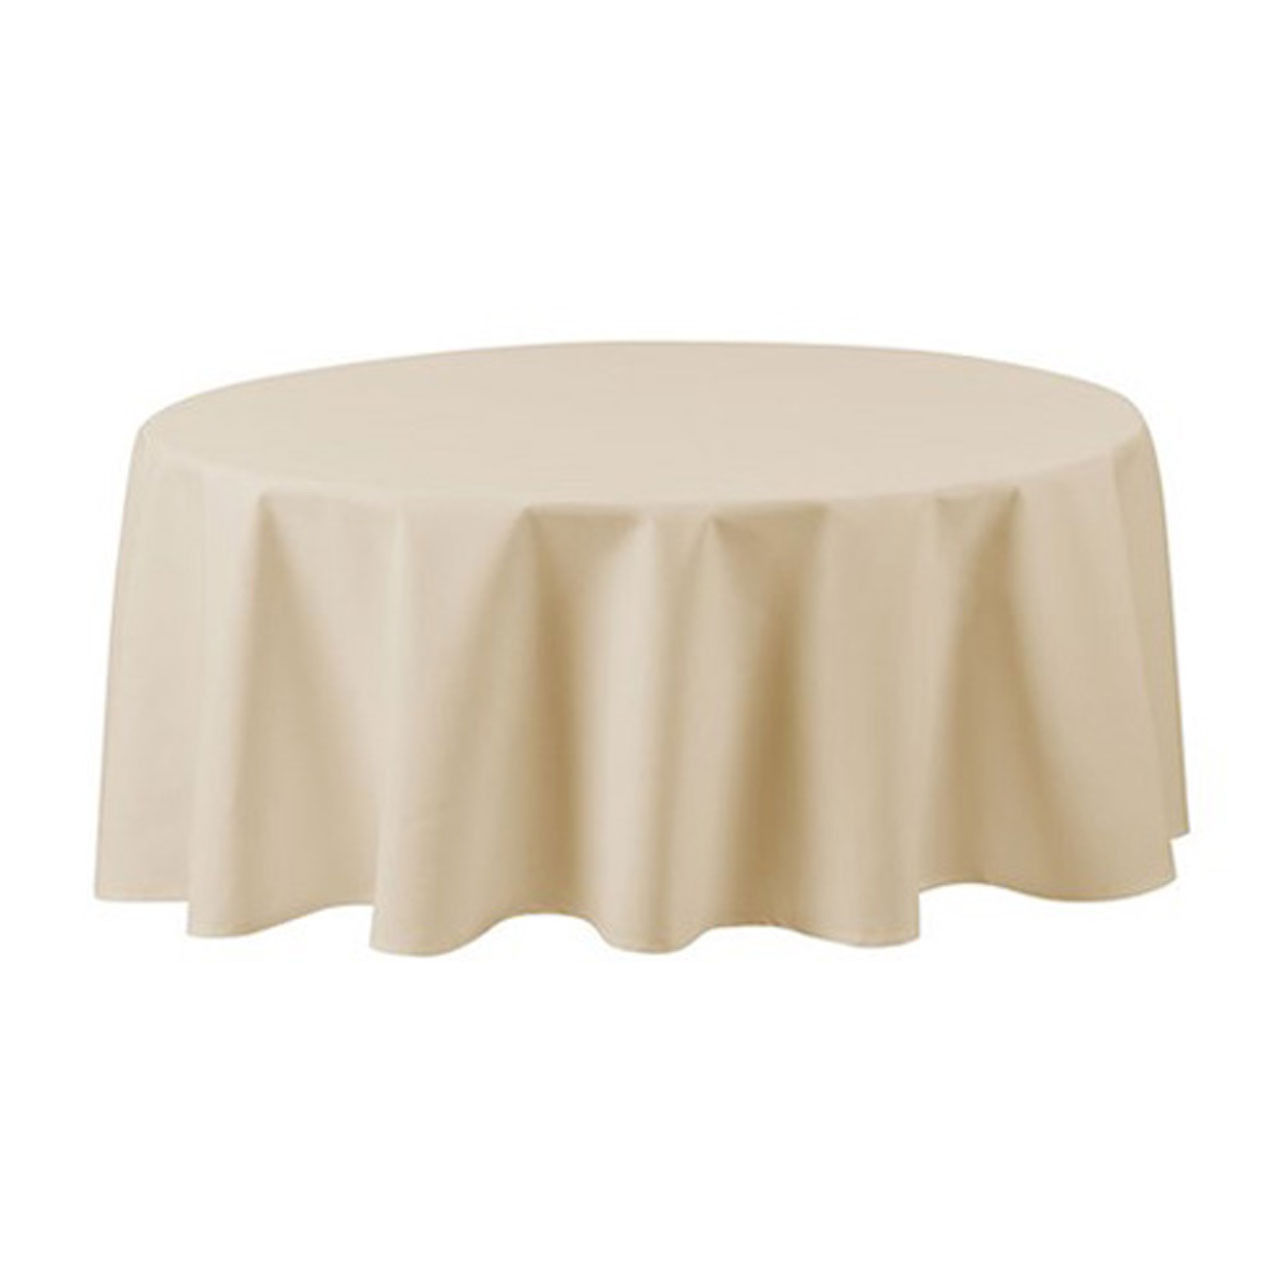 What is the best type of tablecloth?